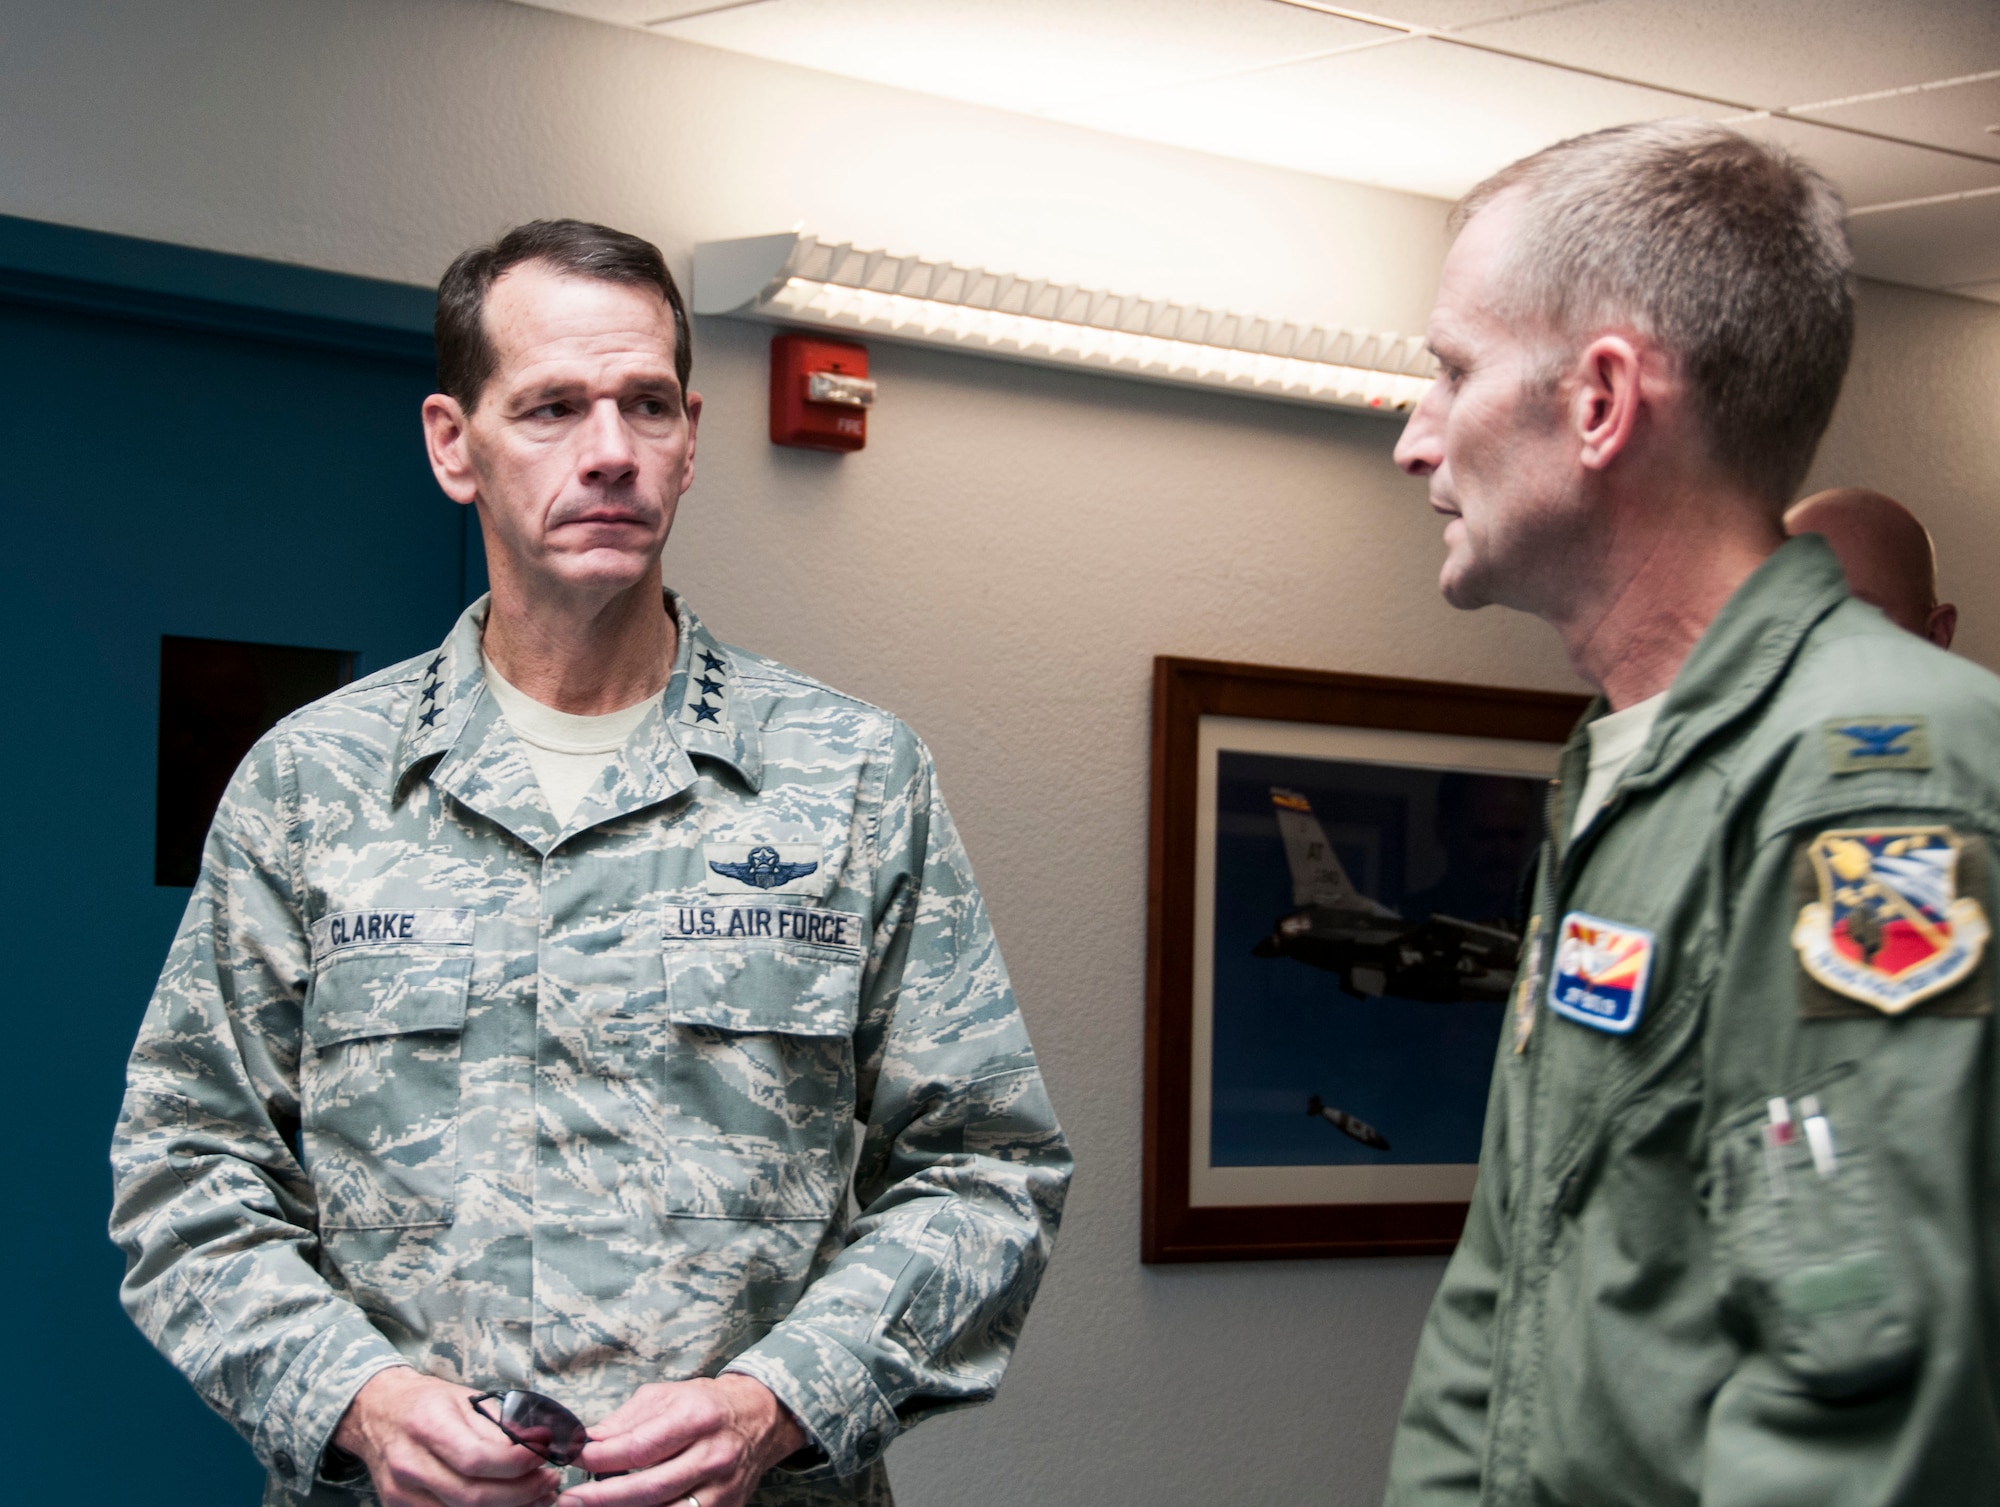 Lt. Gen. Stanley E. Clarke III, director of the Air National Guard, speaks with Col. Jeffery Butler, commander of the 162nd Operations Group at the 162nd Fighter Wing in Tucson, Ariz., Dec. 13, 2013.  The visit is Clarke's first to the Arizona Air Guard since becoming director. During the visit, Clarke met with Airmen from 162nd Fighter and the 214th Reconnaissance Group. (U.S. Air National Guard photo by Staff Sgt. Dina Farmer/Released)